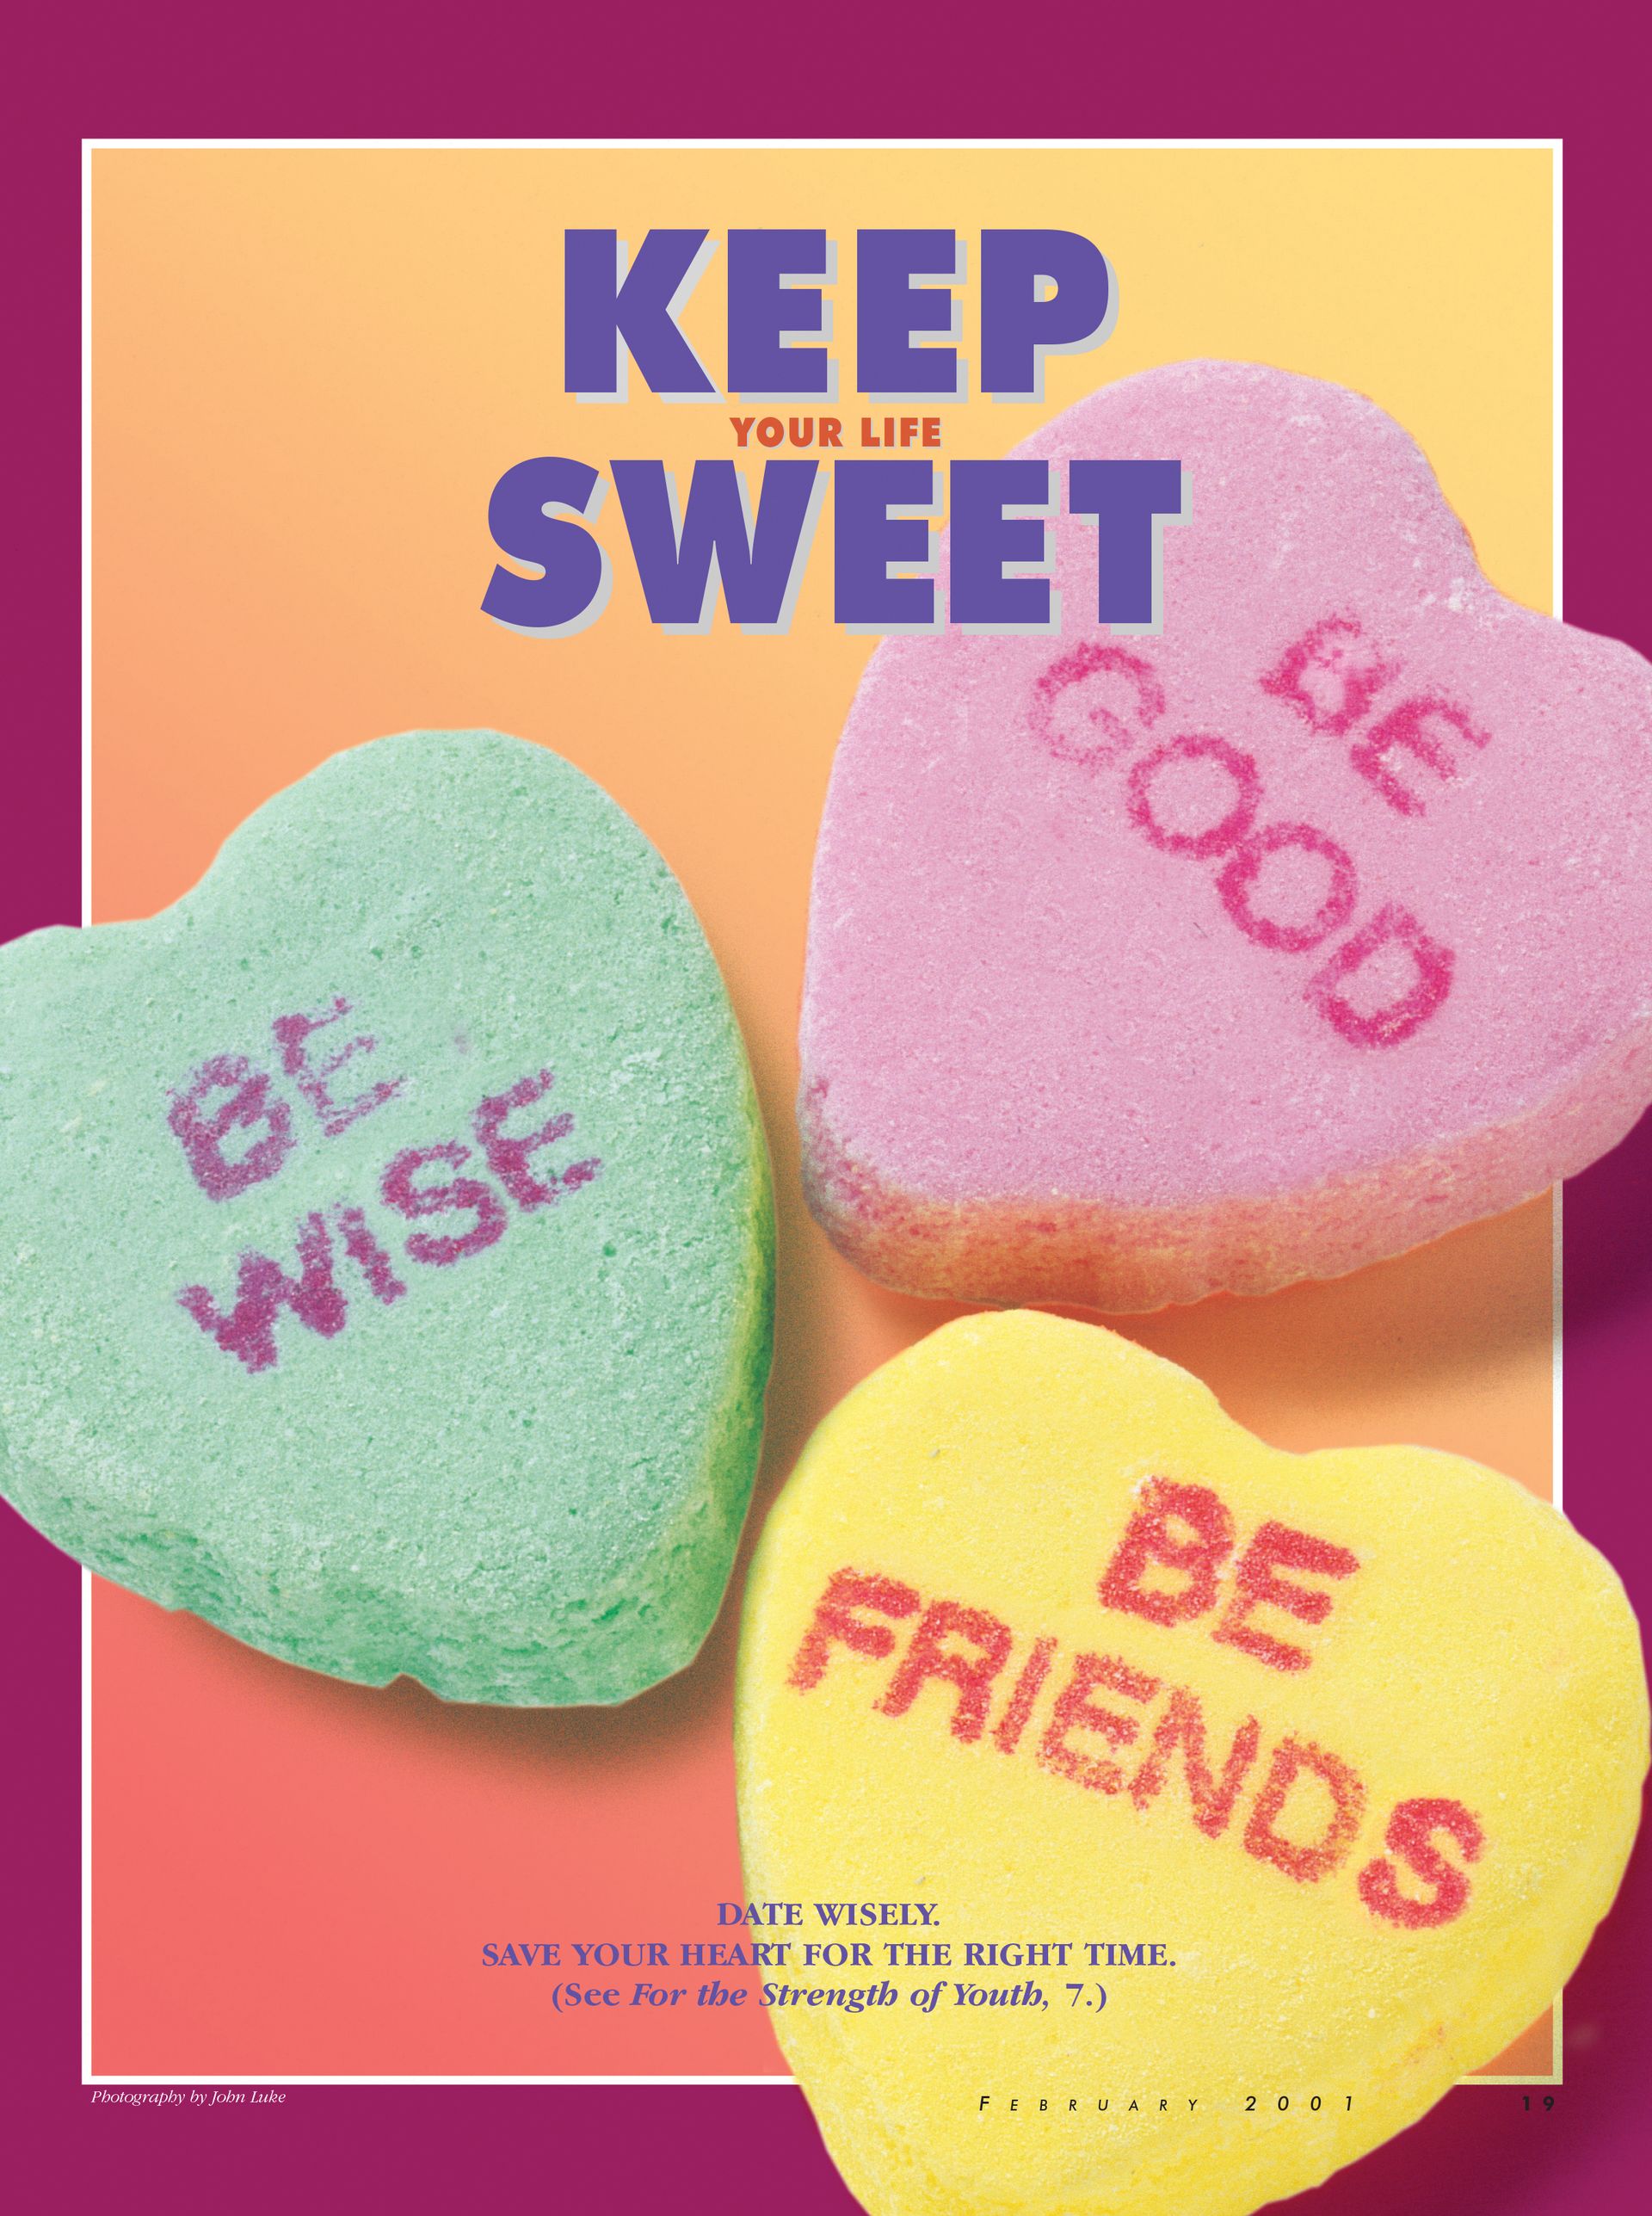 Keep Your Life Sweet. Date wisely. Save your heart for the right time. (See For the Strength of Youth, 7.) Feb. 2001 © undefined ipCode 1.